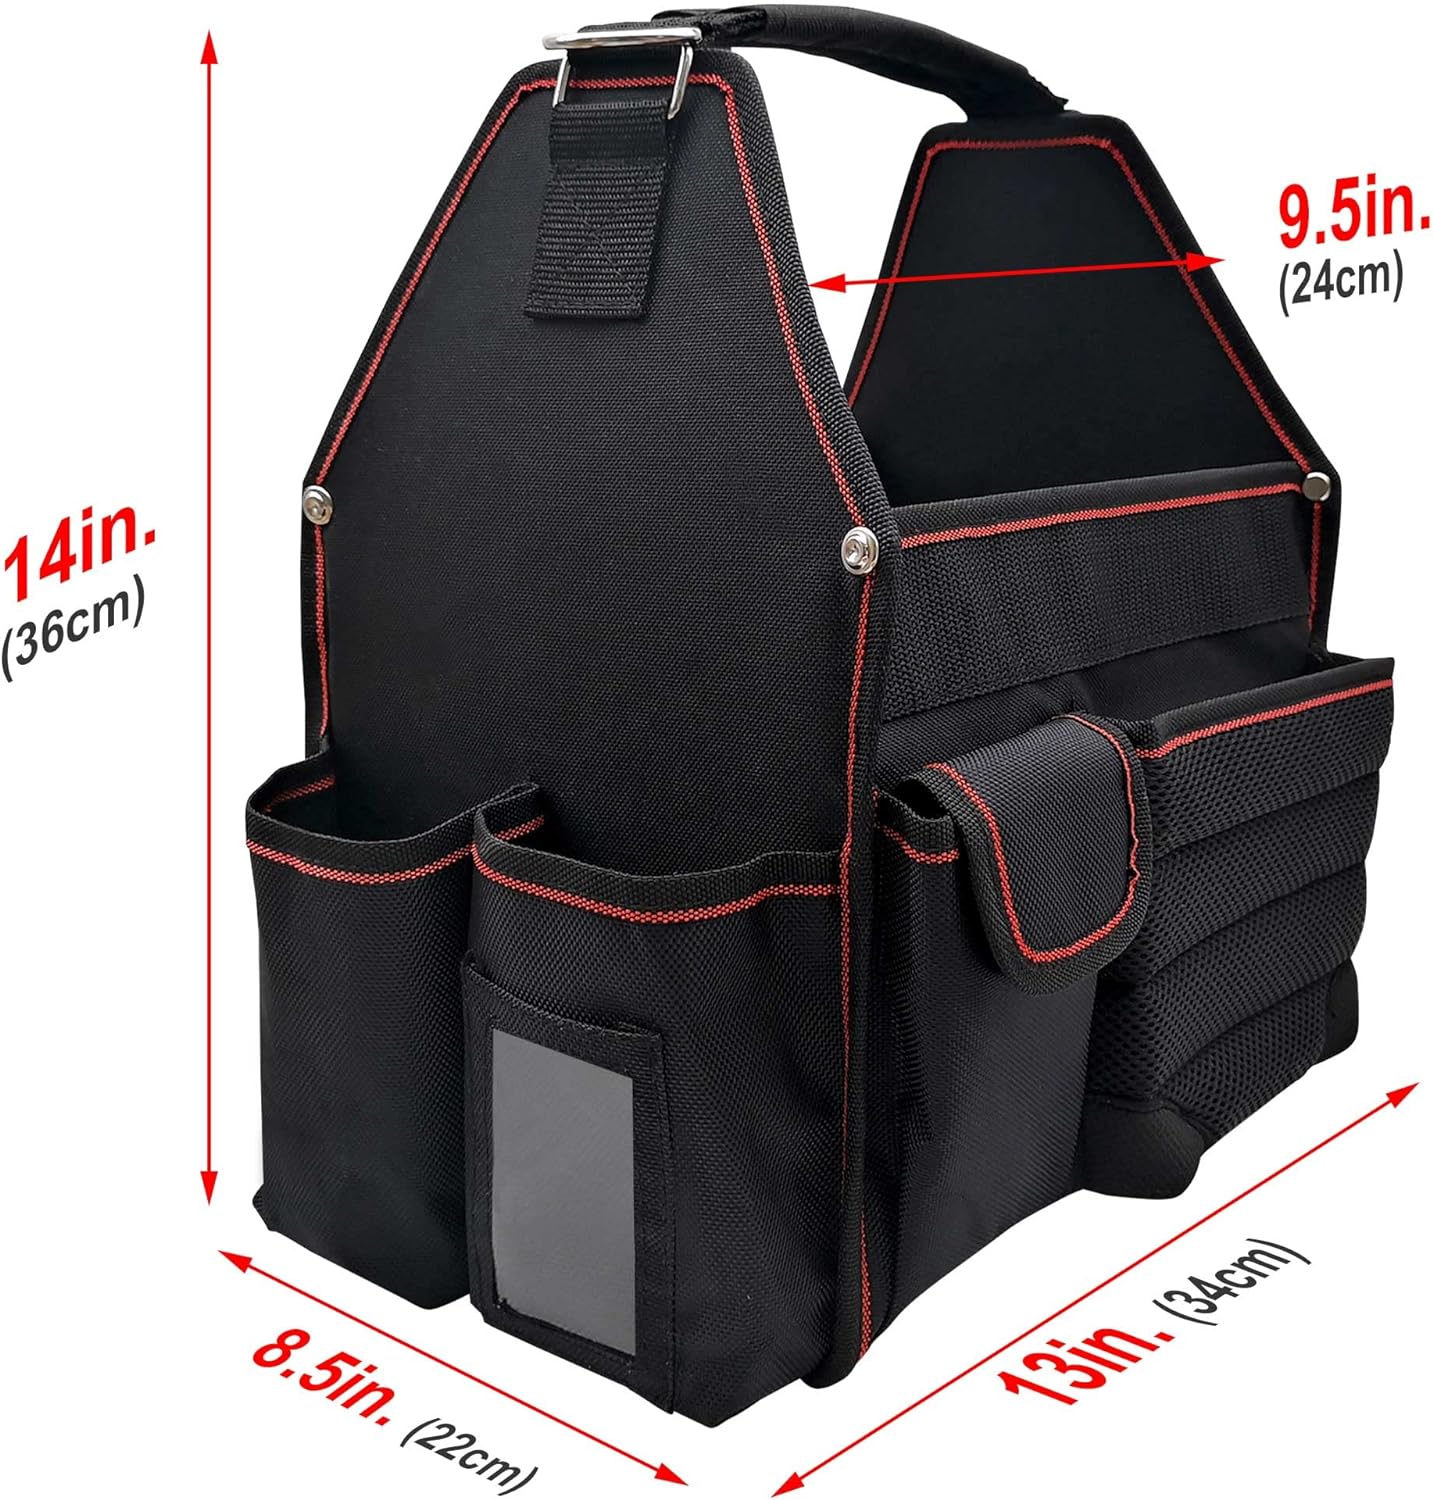 HAUTMEC 18-Pocket Electrical and Maintenance Tool Carrier, Open Top Foldable Smart Design Tools Bag HT0143-TB